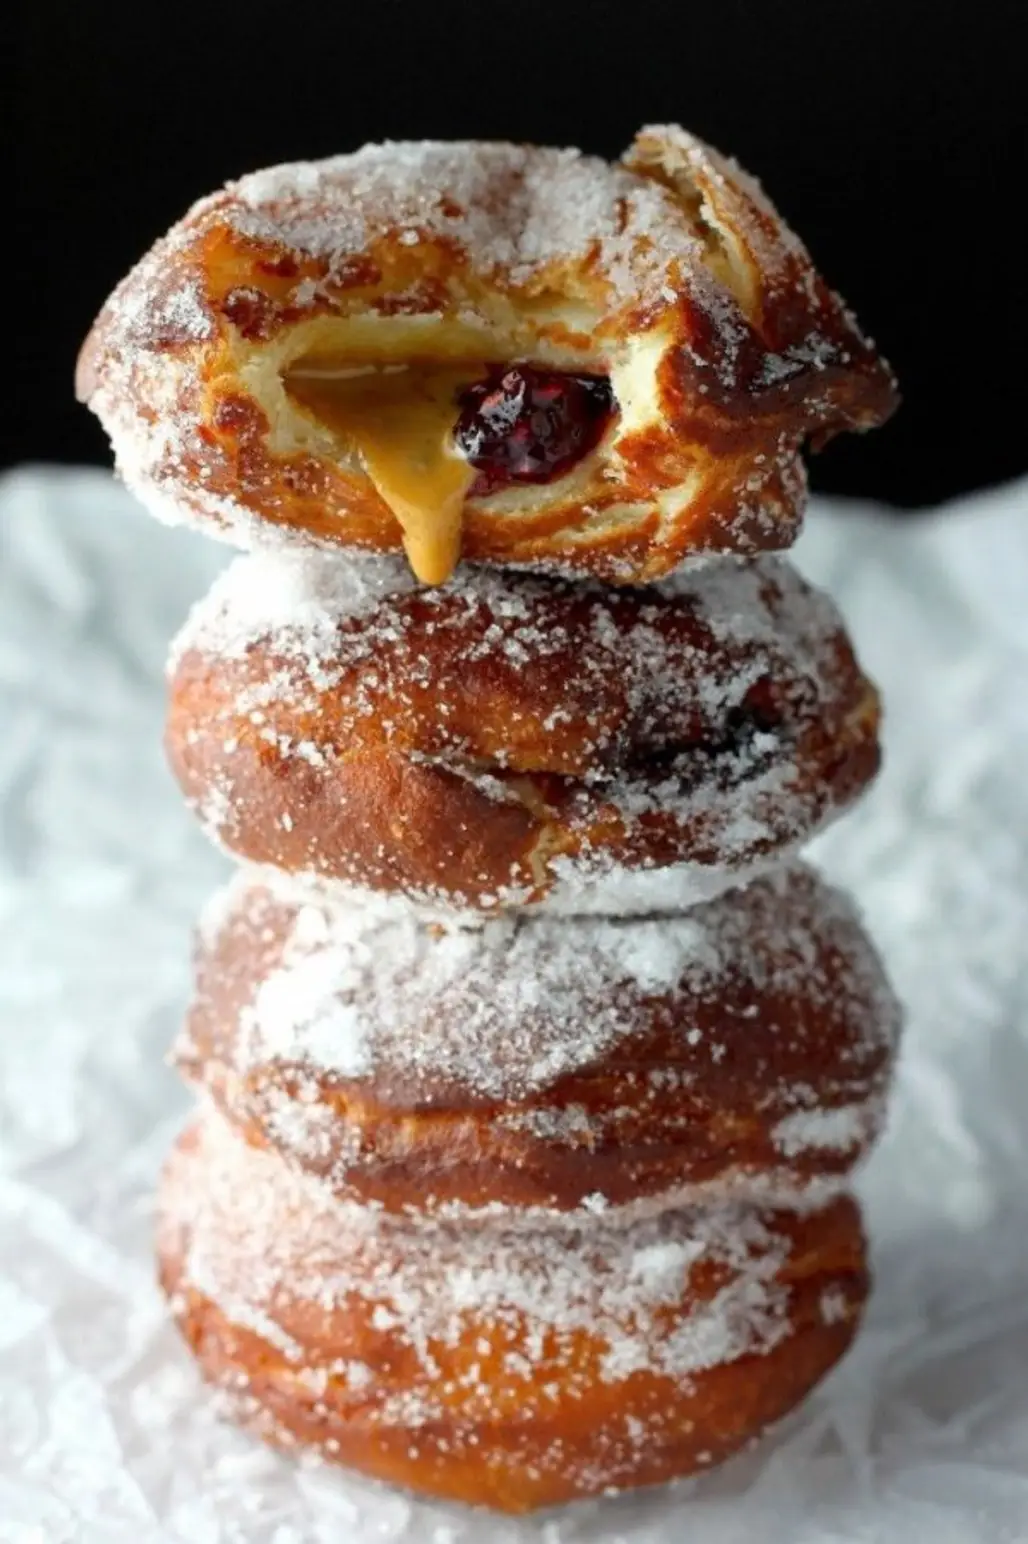 Bakery Style Peanut Butter and Jelly Doughnuts